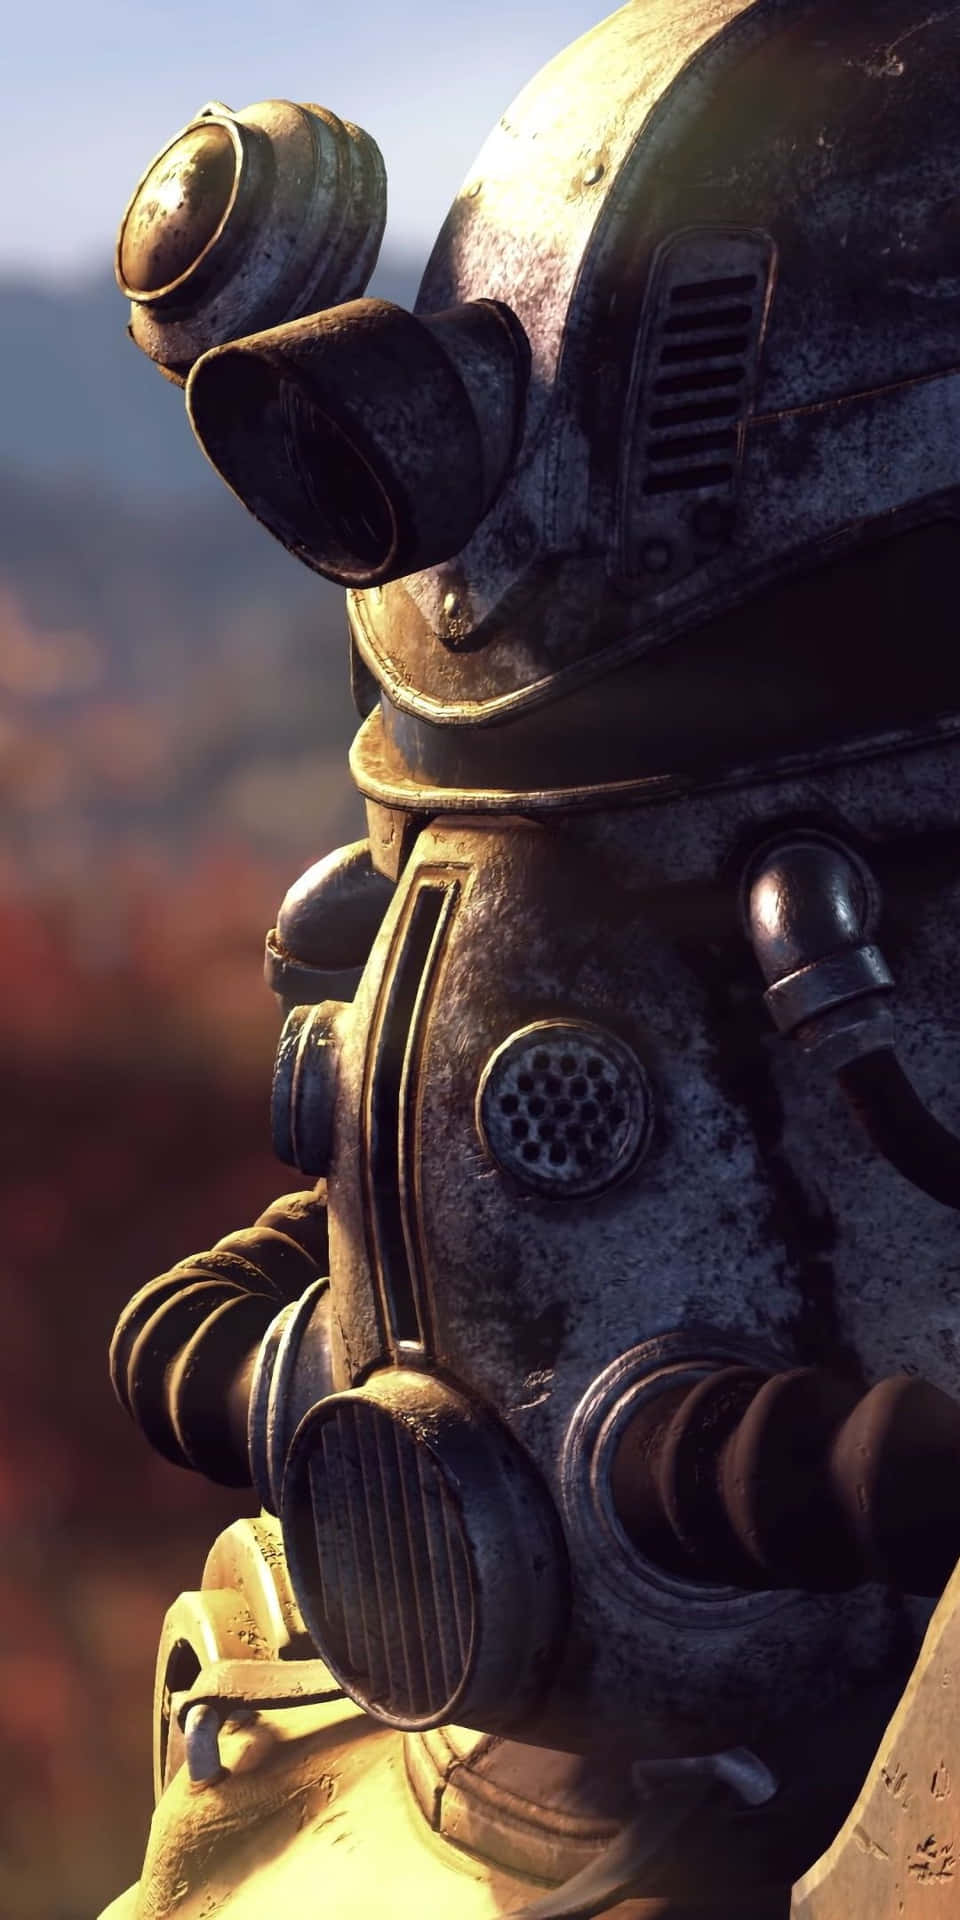 Unlock the secrets of the Wasteland with Pixel 3 and Fallout 76